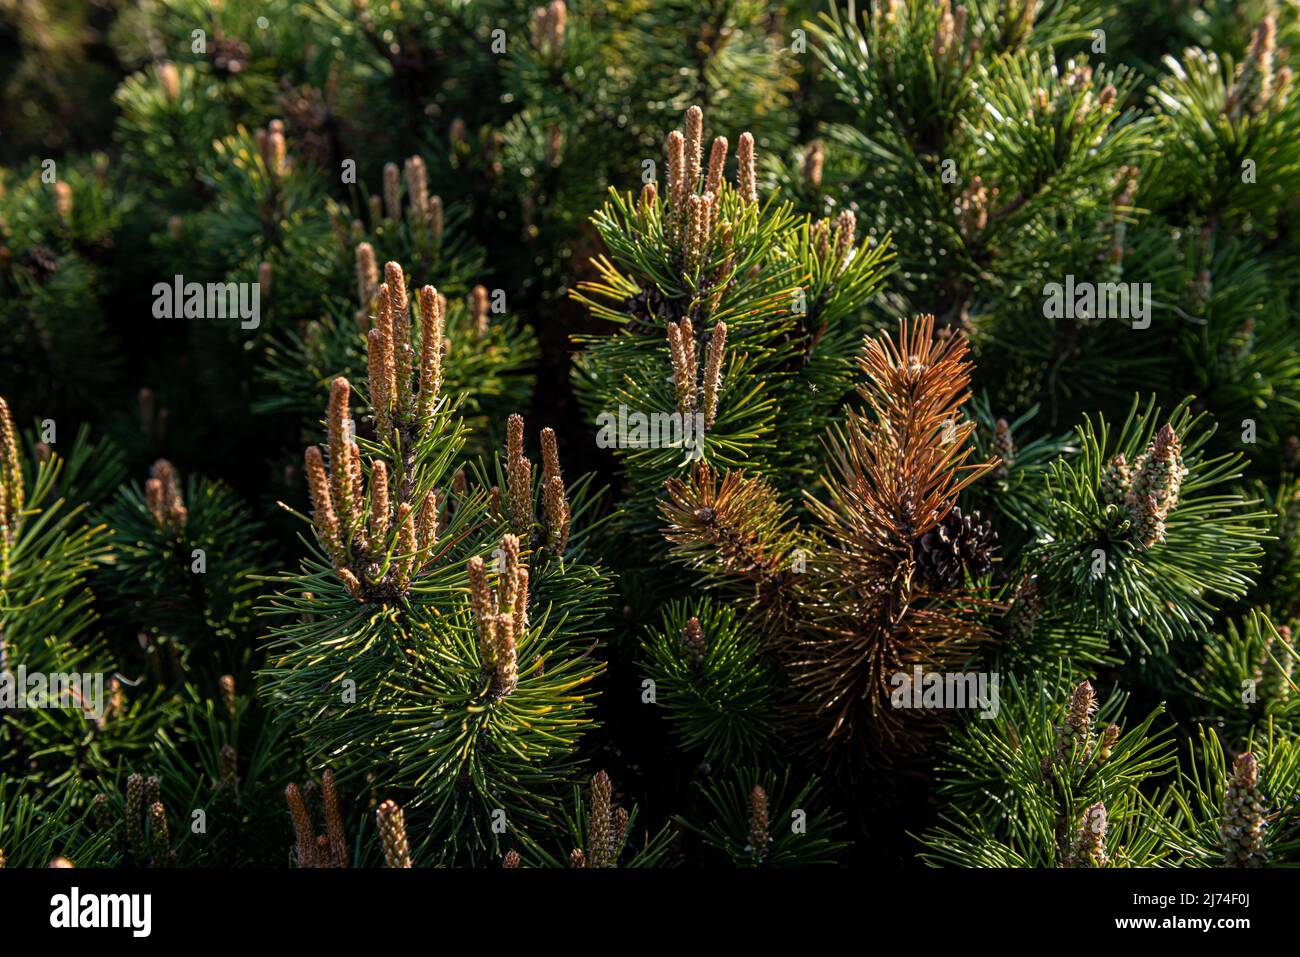 Young shoots and pine cones close up. Stock Photo